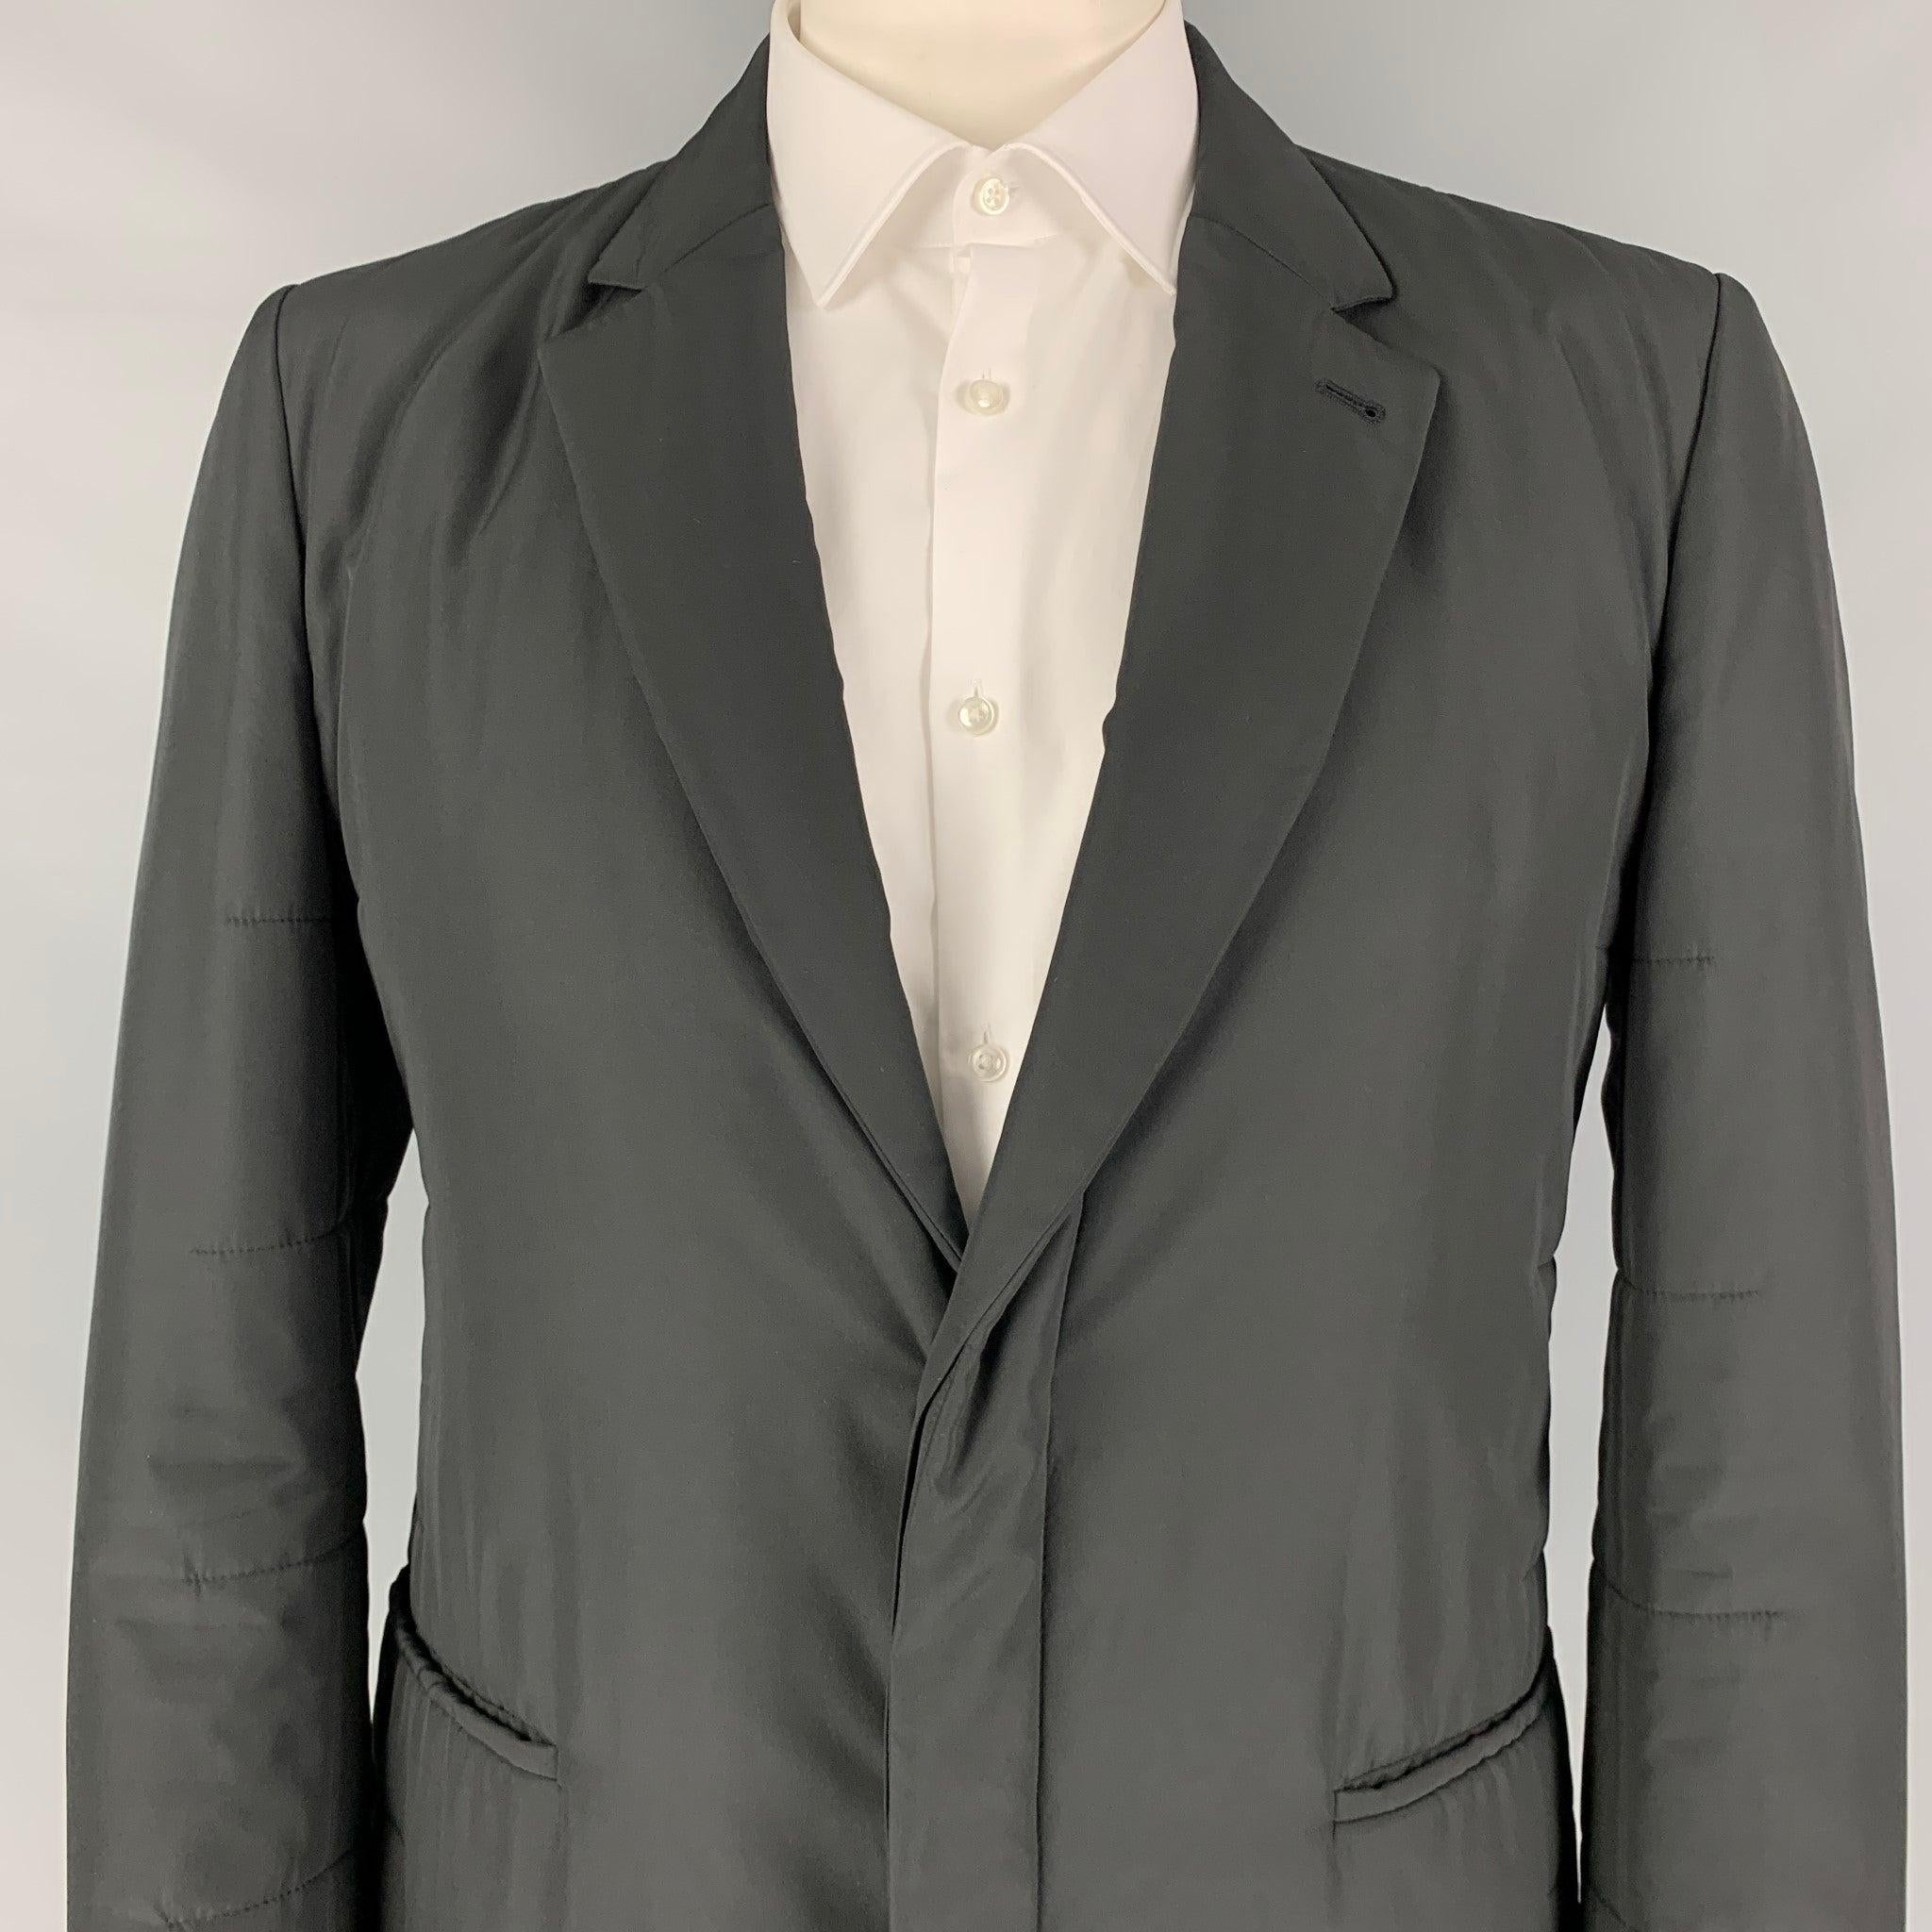 CALVIN KLEIN COLLECTION sport coat comes in a black quilted polyester with a full liner featuring a notch lapel, slit pockets, and a hidden double button closure.
Excellent
Pre-Owned Condition. 

Marked:   54 

Measurements: 
 
Shoulder: 18.5 inches